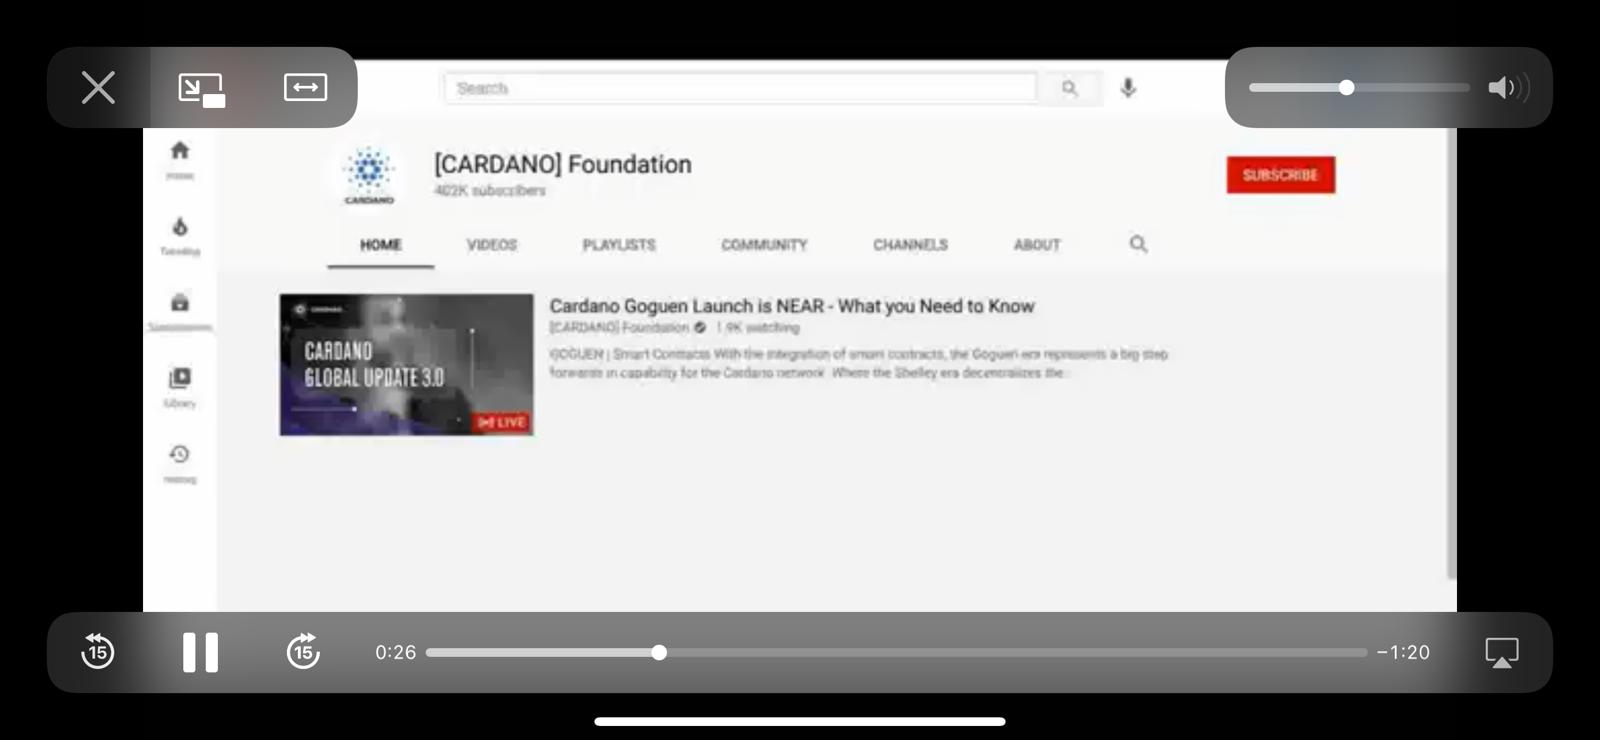 Scam Alert: New Series Of Hacks Against Youtube Channels Impersonating Official Cardano Announcements